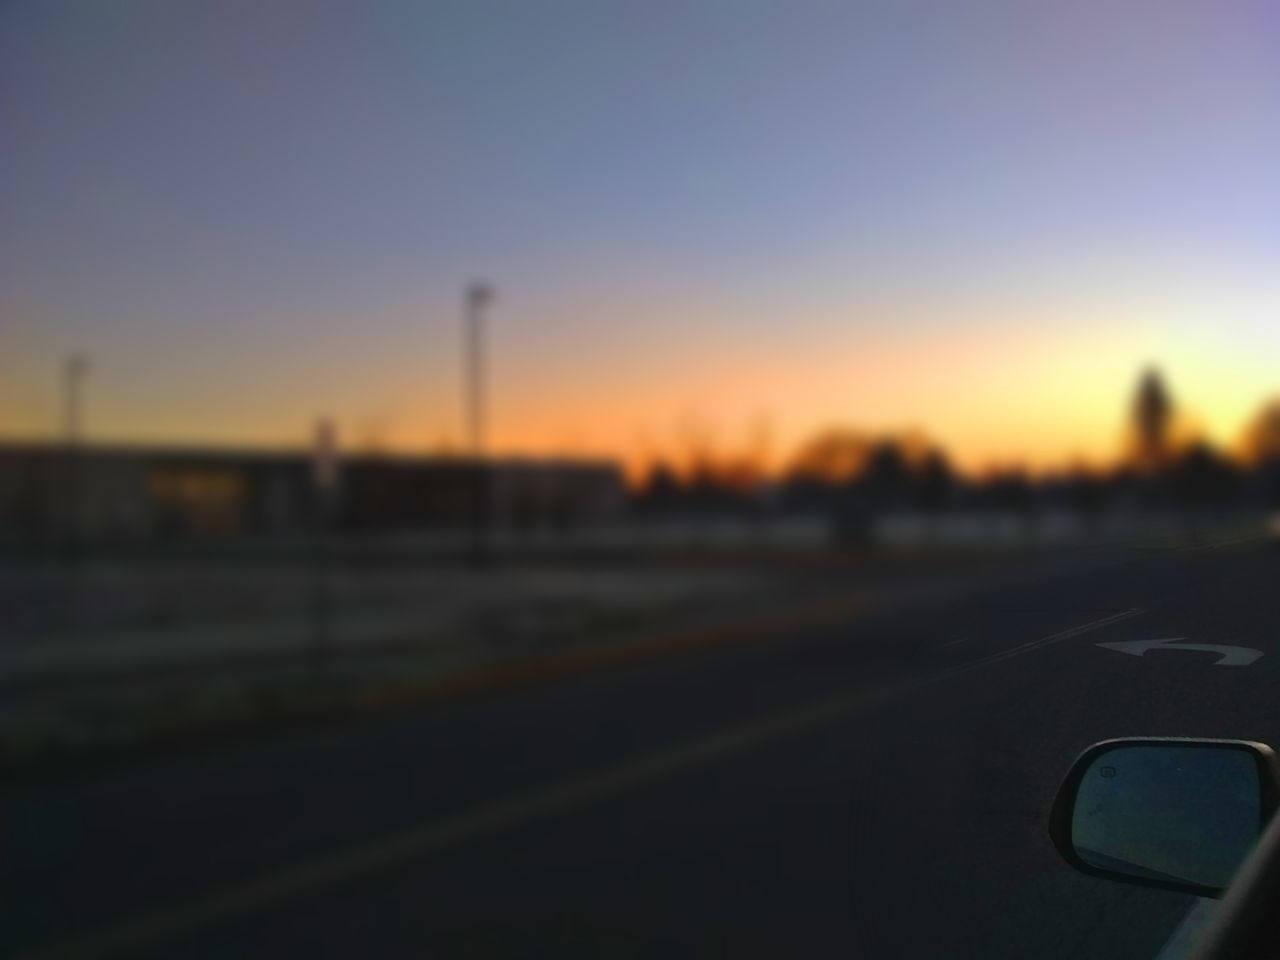 CLOSE-UP OF CAR WINDSHIELD AGAINST CLEAR SKY DURING SUNSET